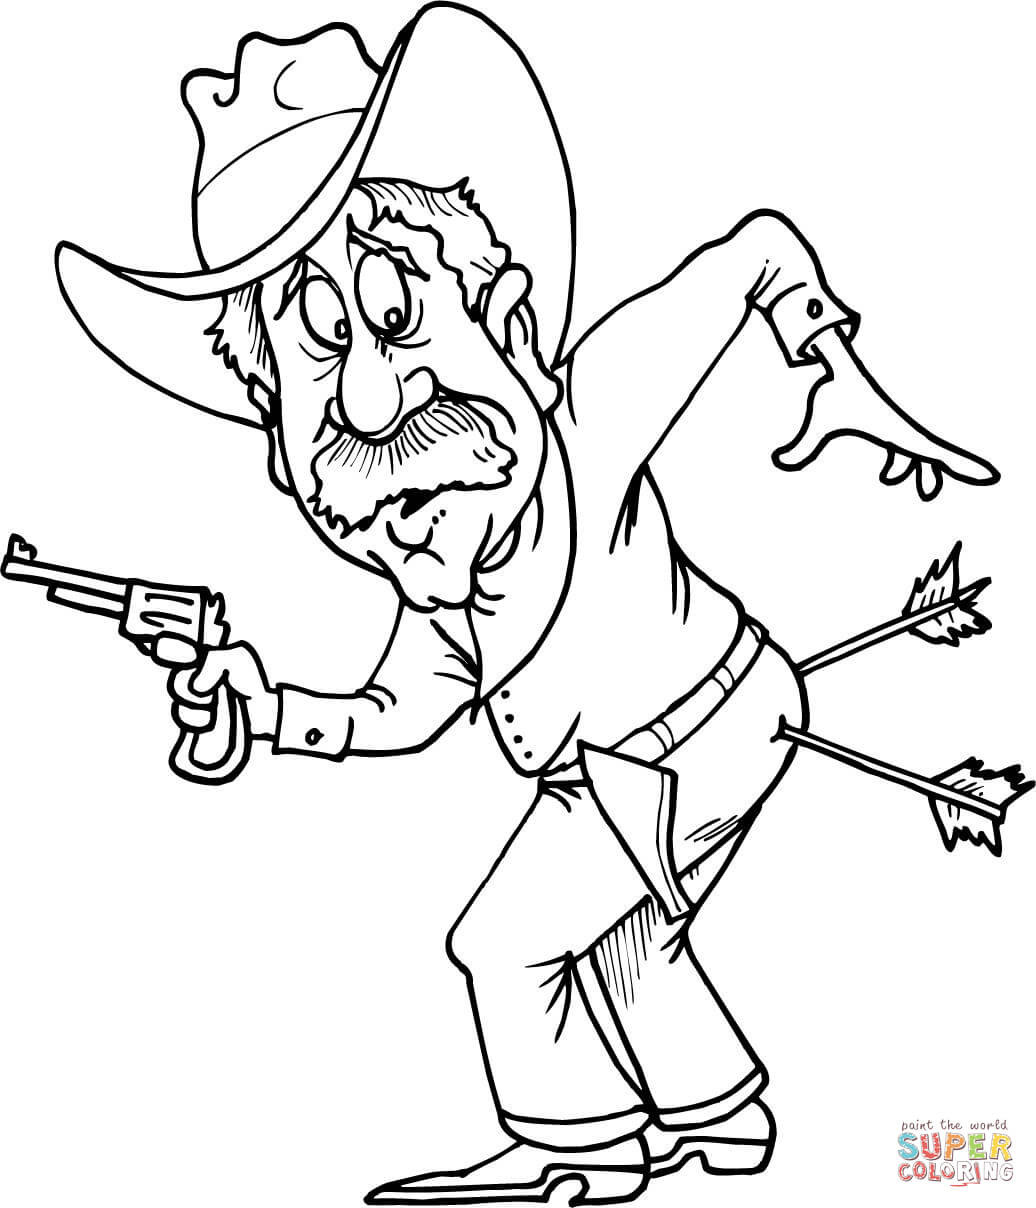 Cowboys Coloring Pages
 Cowboy with Two Arrows in Butt coloring page